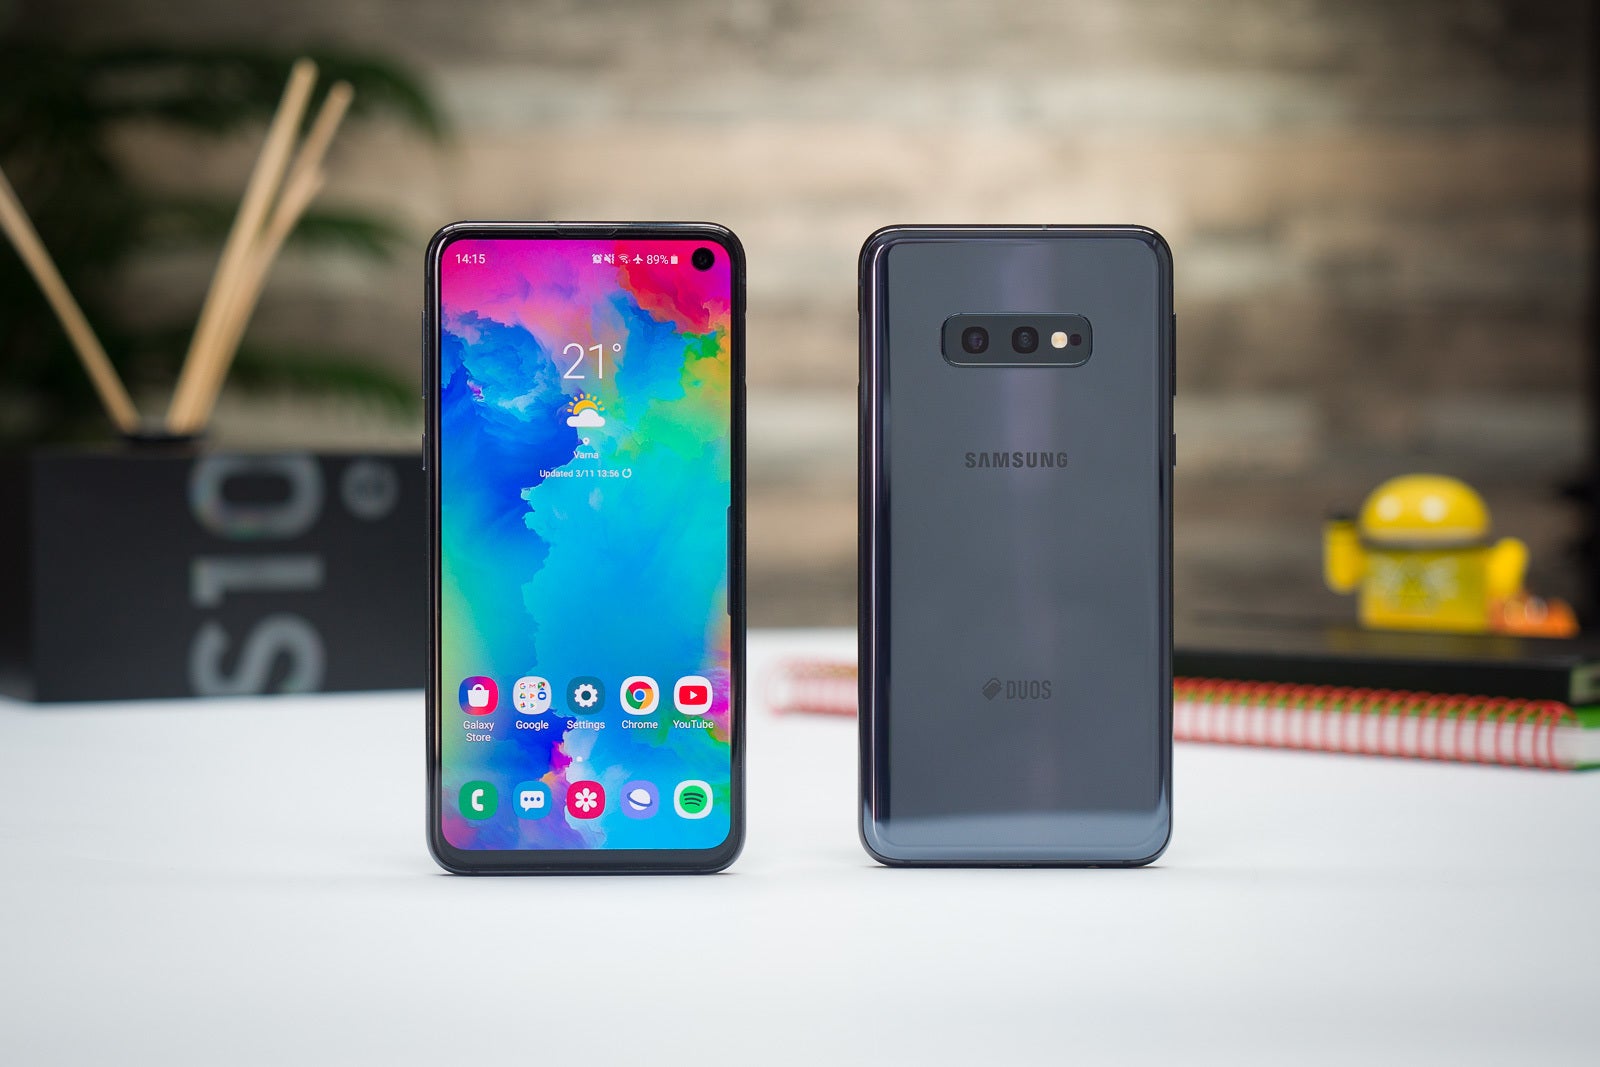 Samsung Galaxy S10e - The Moto Z4 Force could be Motorola's answer to the Galaxy S10e